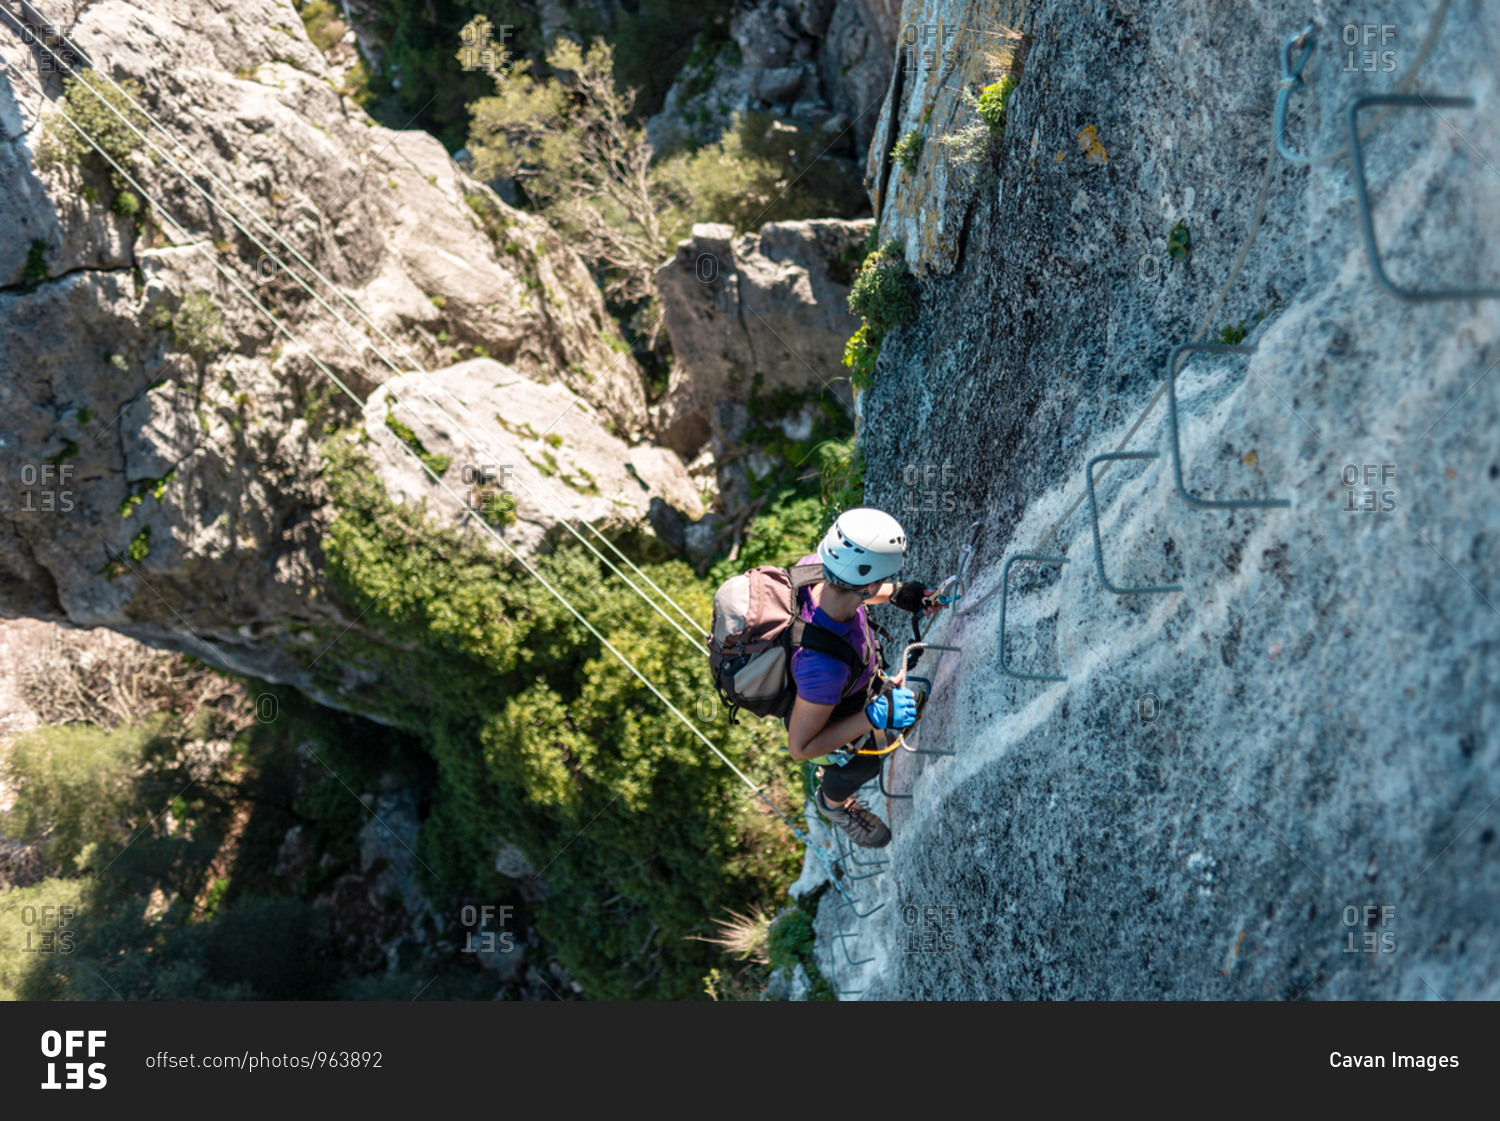 Woman with helmet, harness and backpack walking down via ferrata in the mountains.